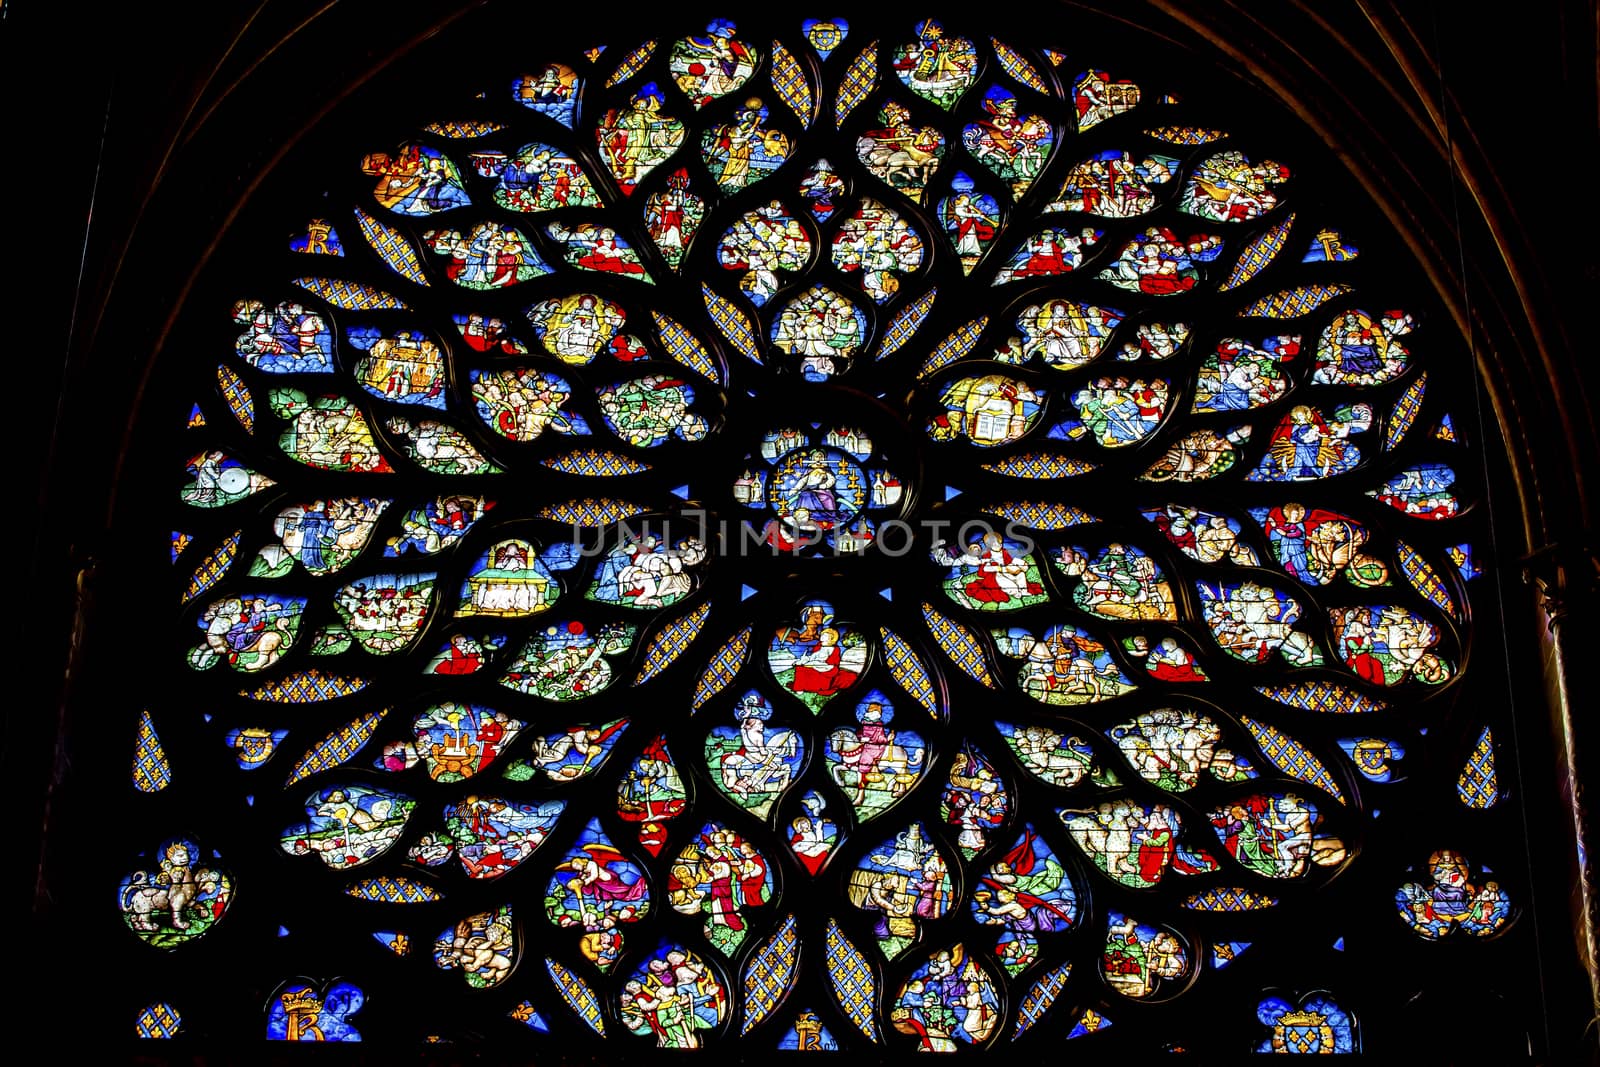 Jesus Christ with Sword Rose Window Stained Glass Sainte Chapelle Paris by bill_perry